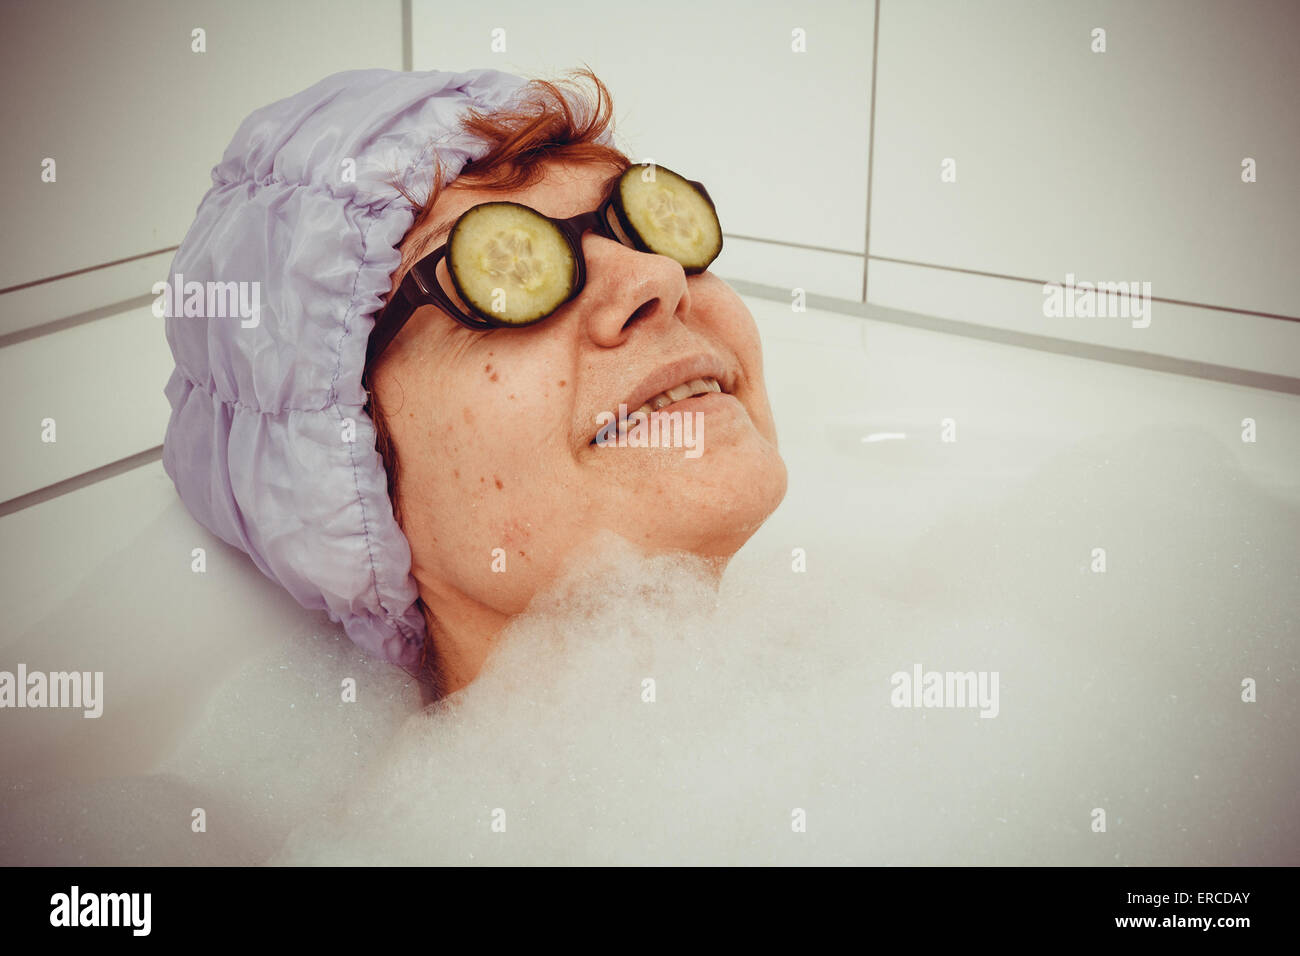 Mature woman in bathtub with cucumber slices on glasses, retro style Stock Photo